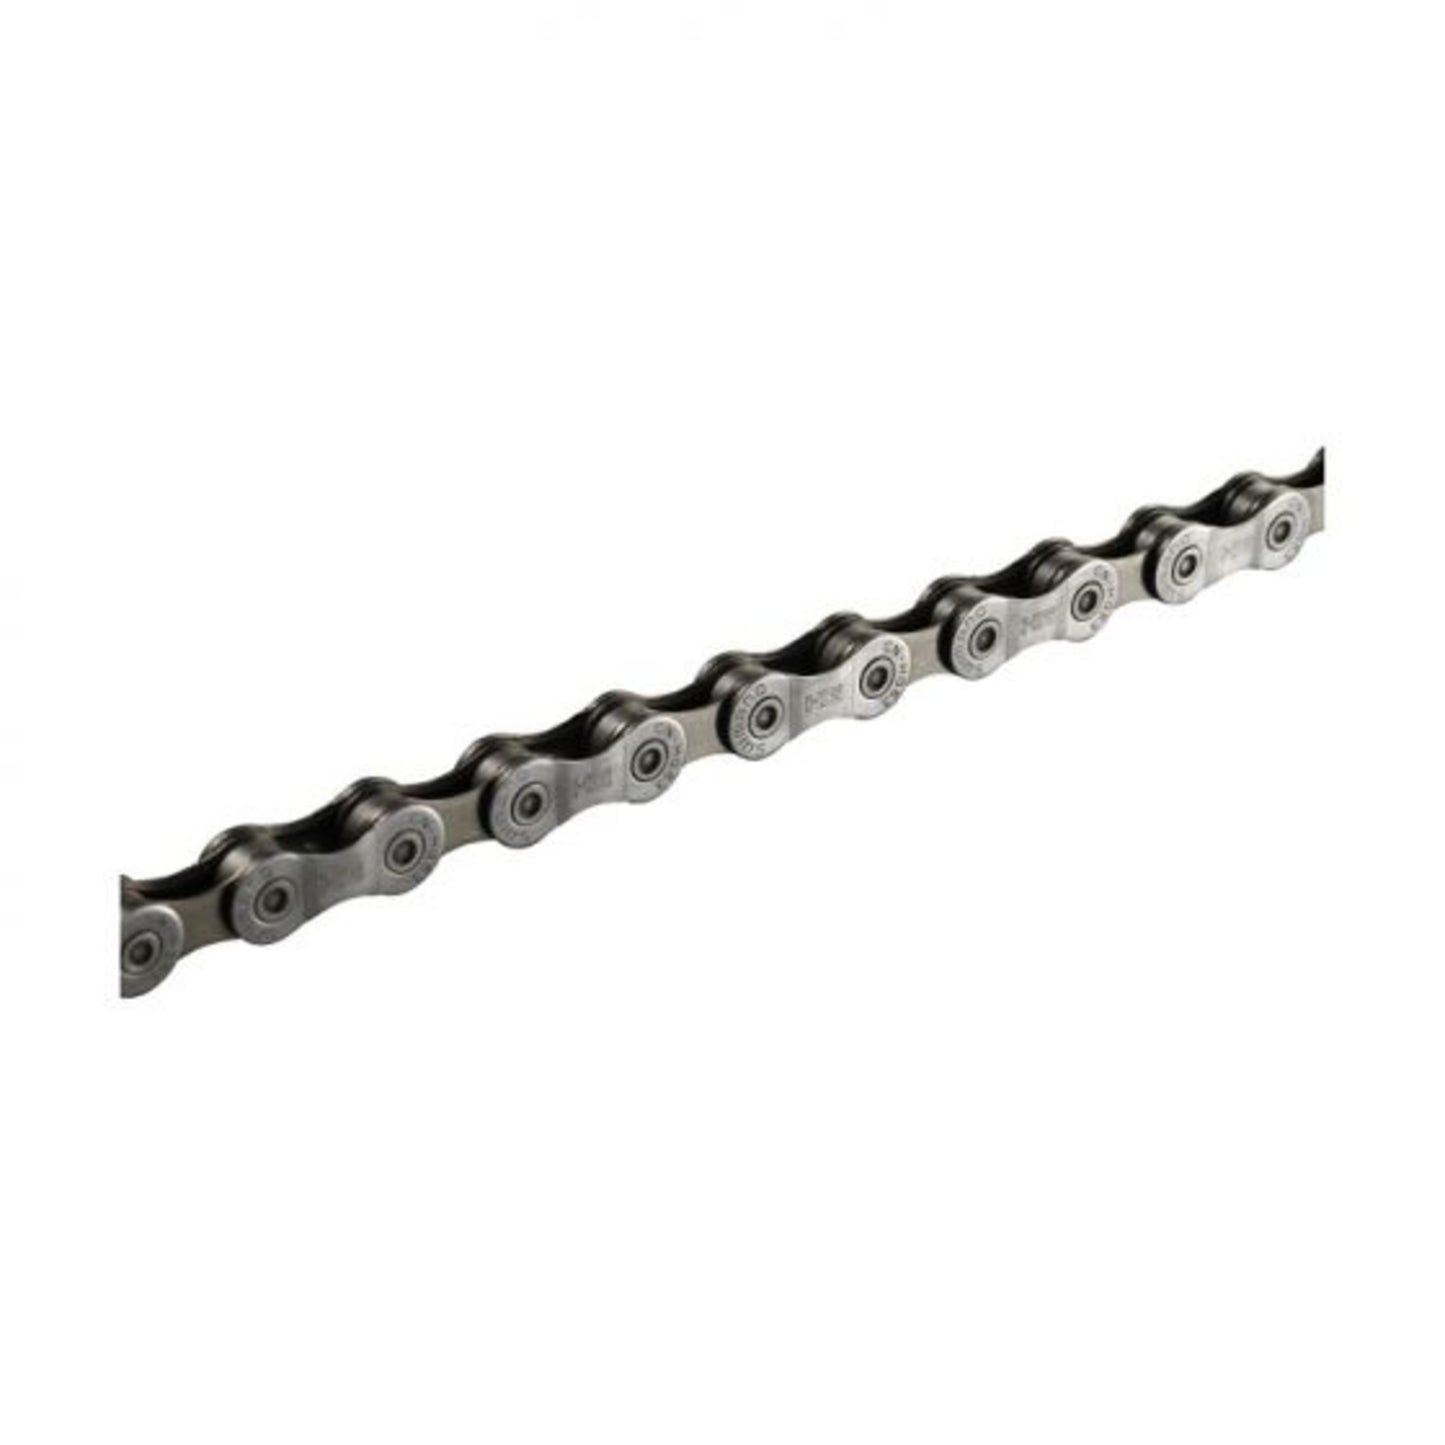 Shimano Shimano HG53 9 Spd Chain Silver Silver / Onesize Silver Onesize  Reid Cycles AU